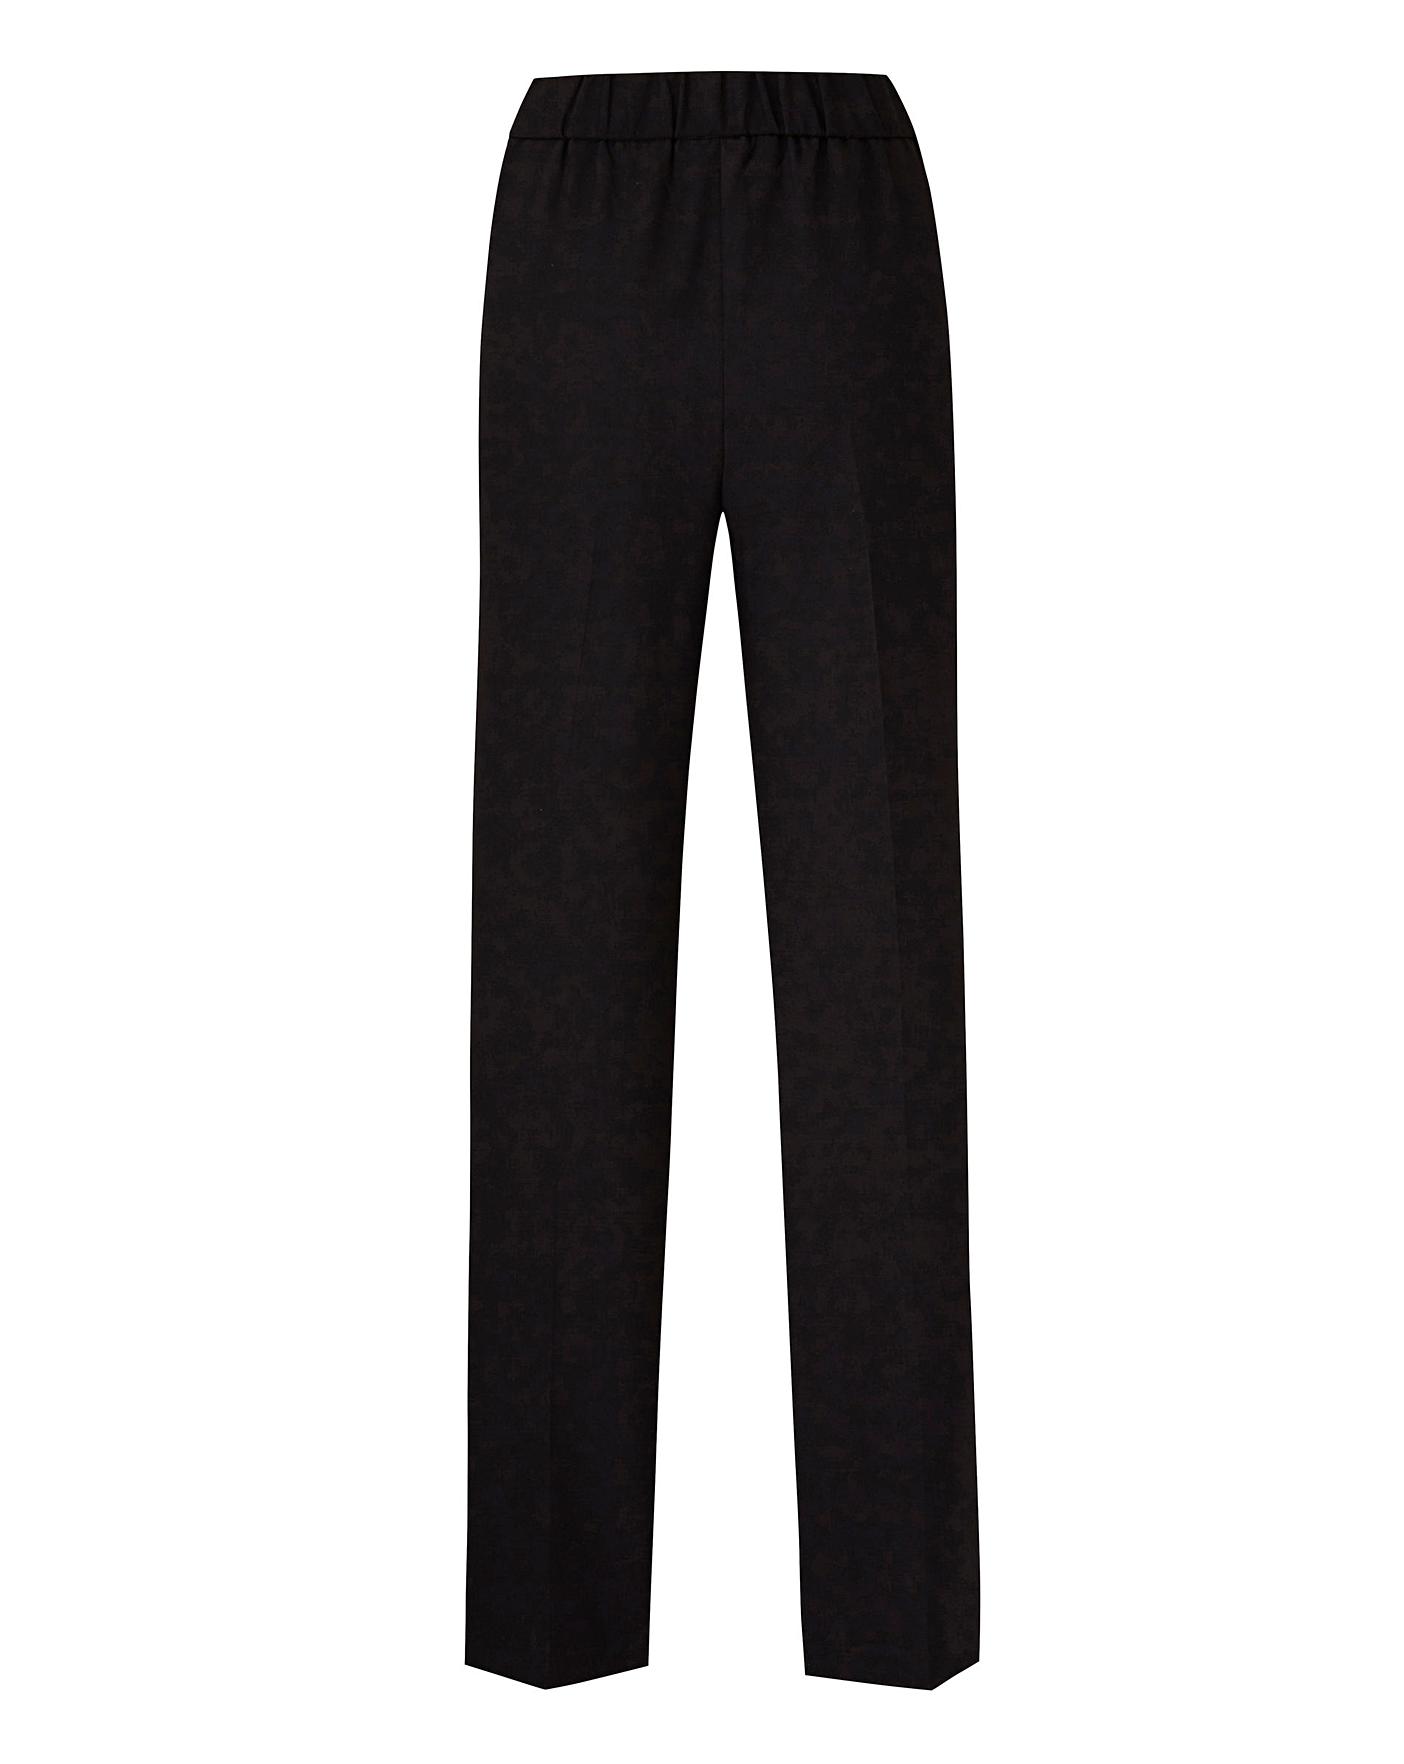 Basic Black Straight Workwear Trousers | Simply Be